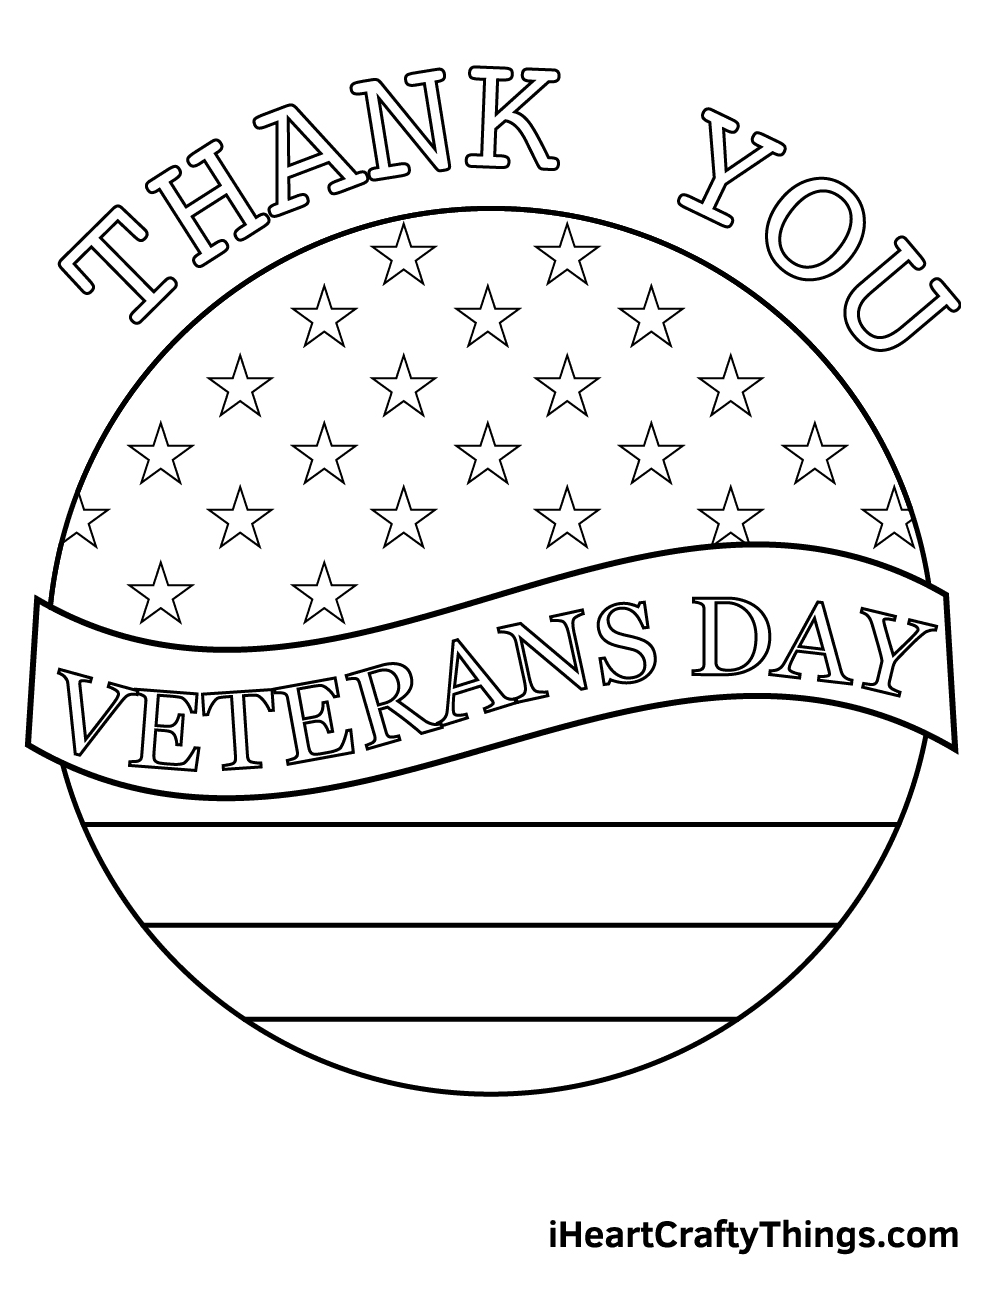 Thanking our Veterans Coloring Pages   Veterans Day Coloring Pages ...